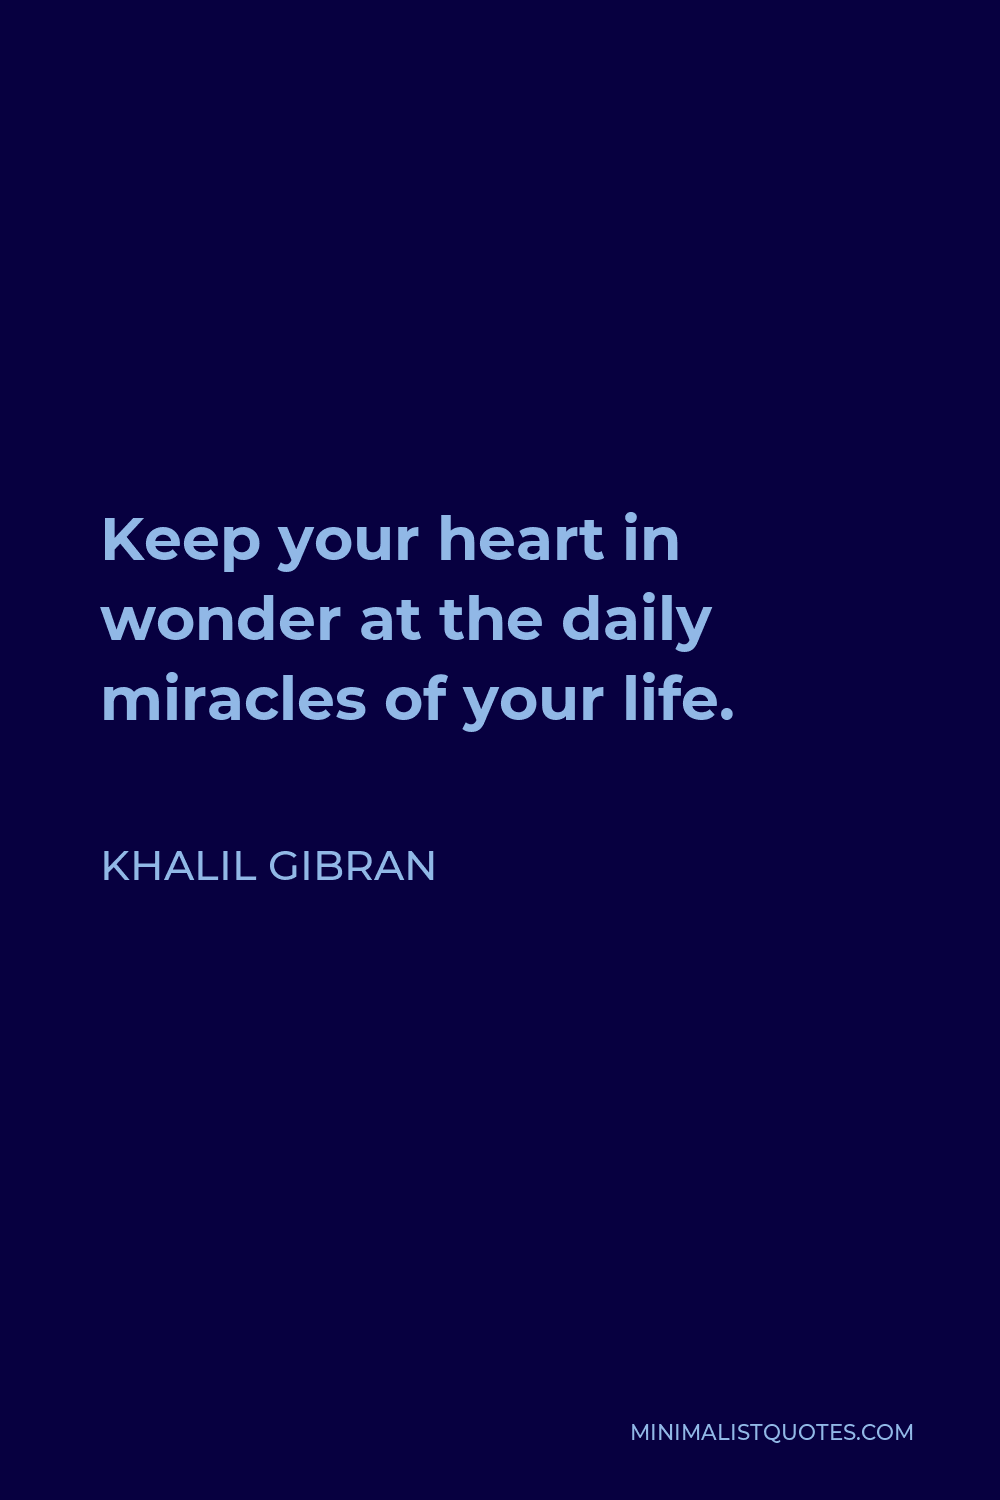 Khalil Gibran Quote - Keep your heart in wonder at the daily miracles of your life.